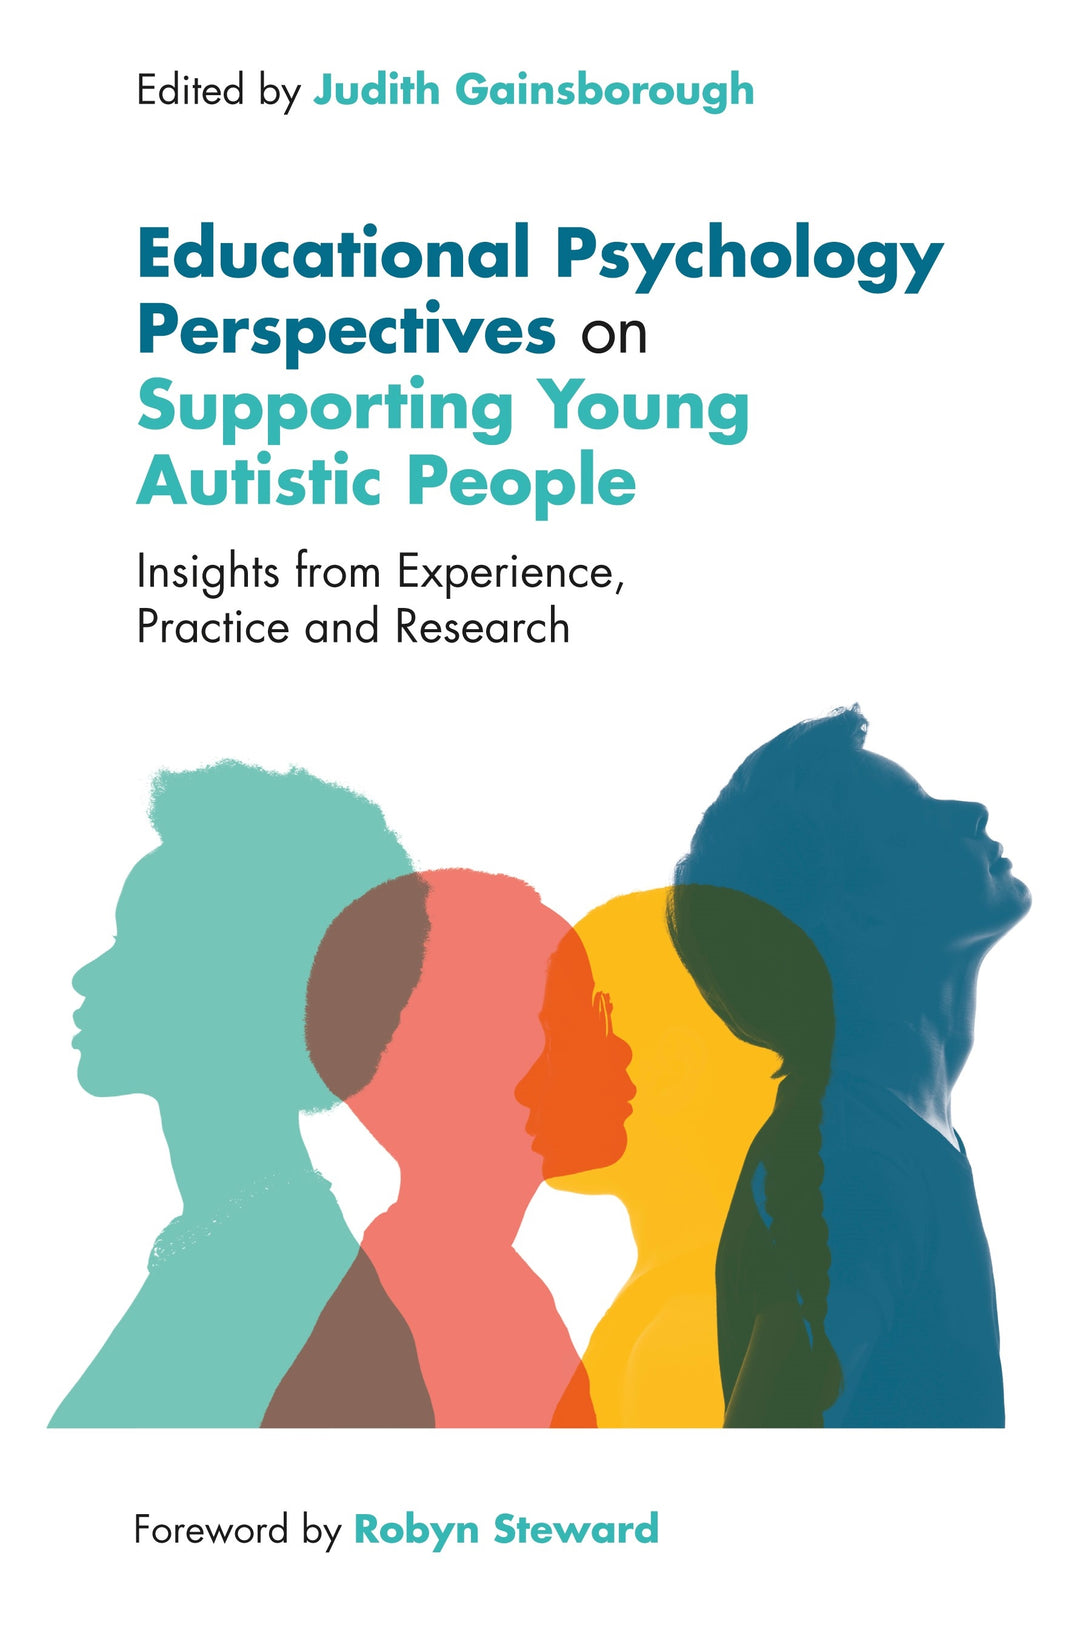 Educational Psychology Perspectives on Supporting Young Autistic People by No Author Listed, Robyn Steward, Judith Gainsborough